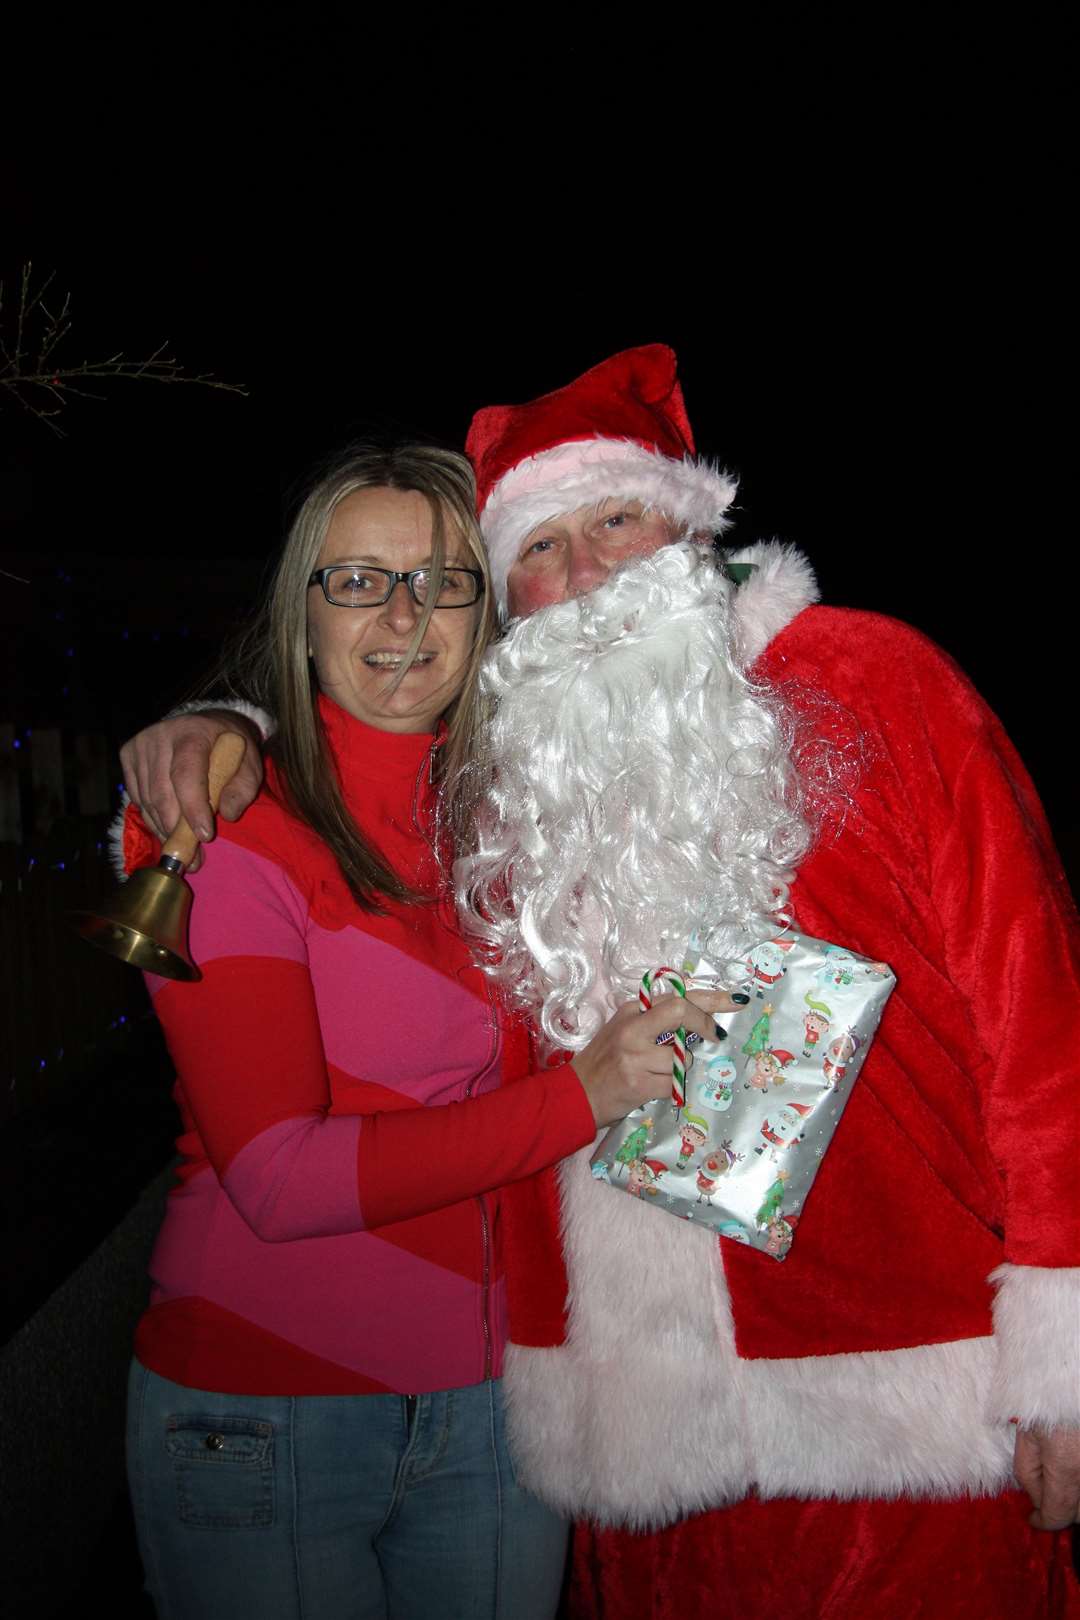 Ashley Poole clutches her beautifully wrapped gift and a candy cane as she poses with Santa for the camera.